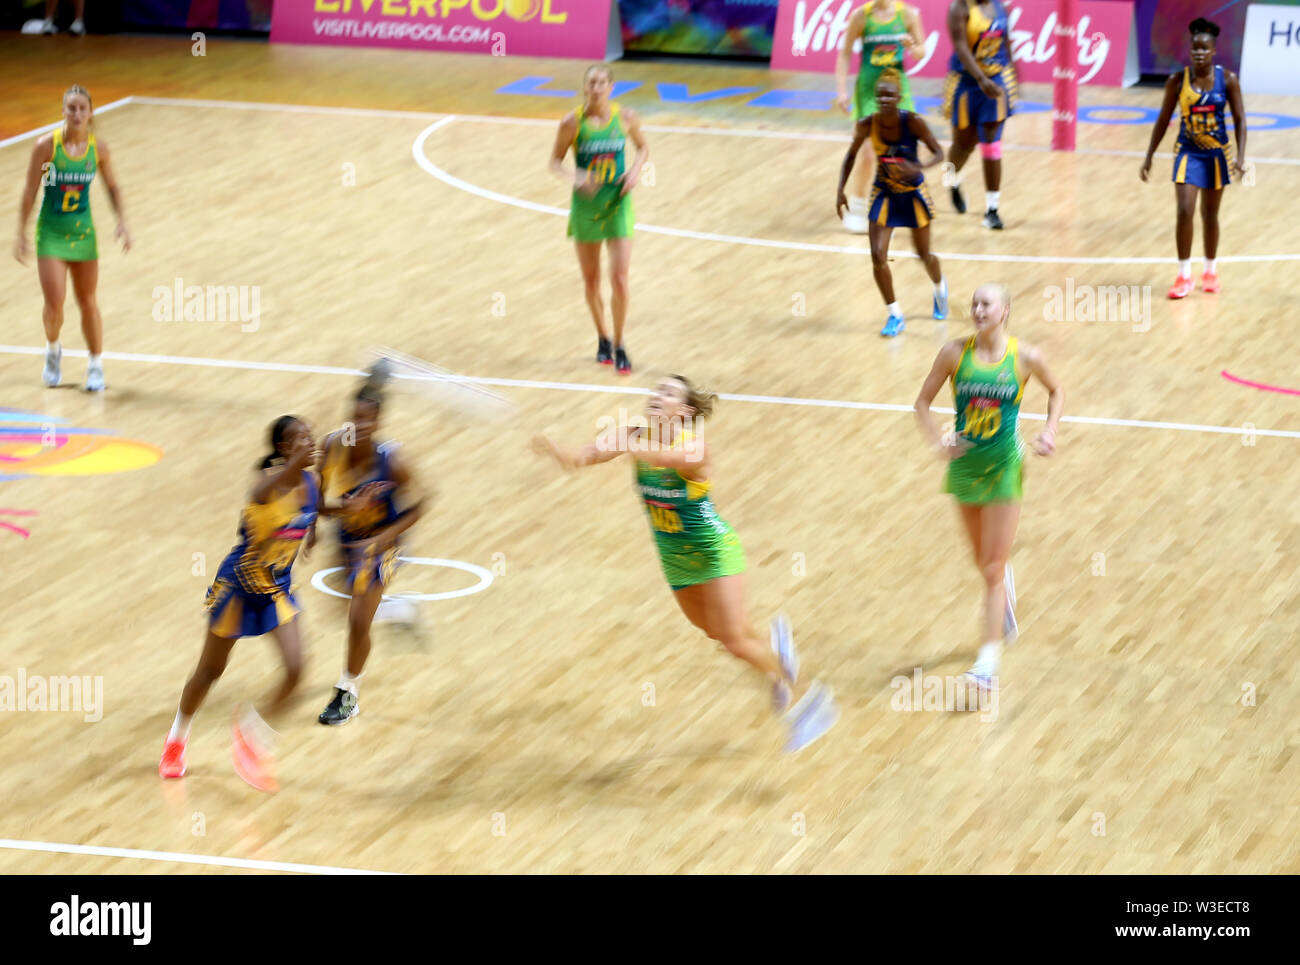 A general view of match action between Australia and Barbados during the netball World Cup match at the M&S Bank Arena, Liverpool. Stock Photo